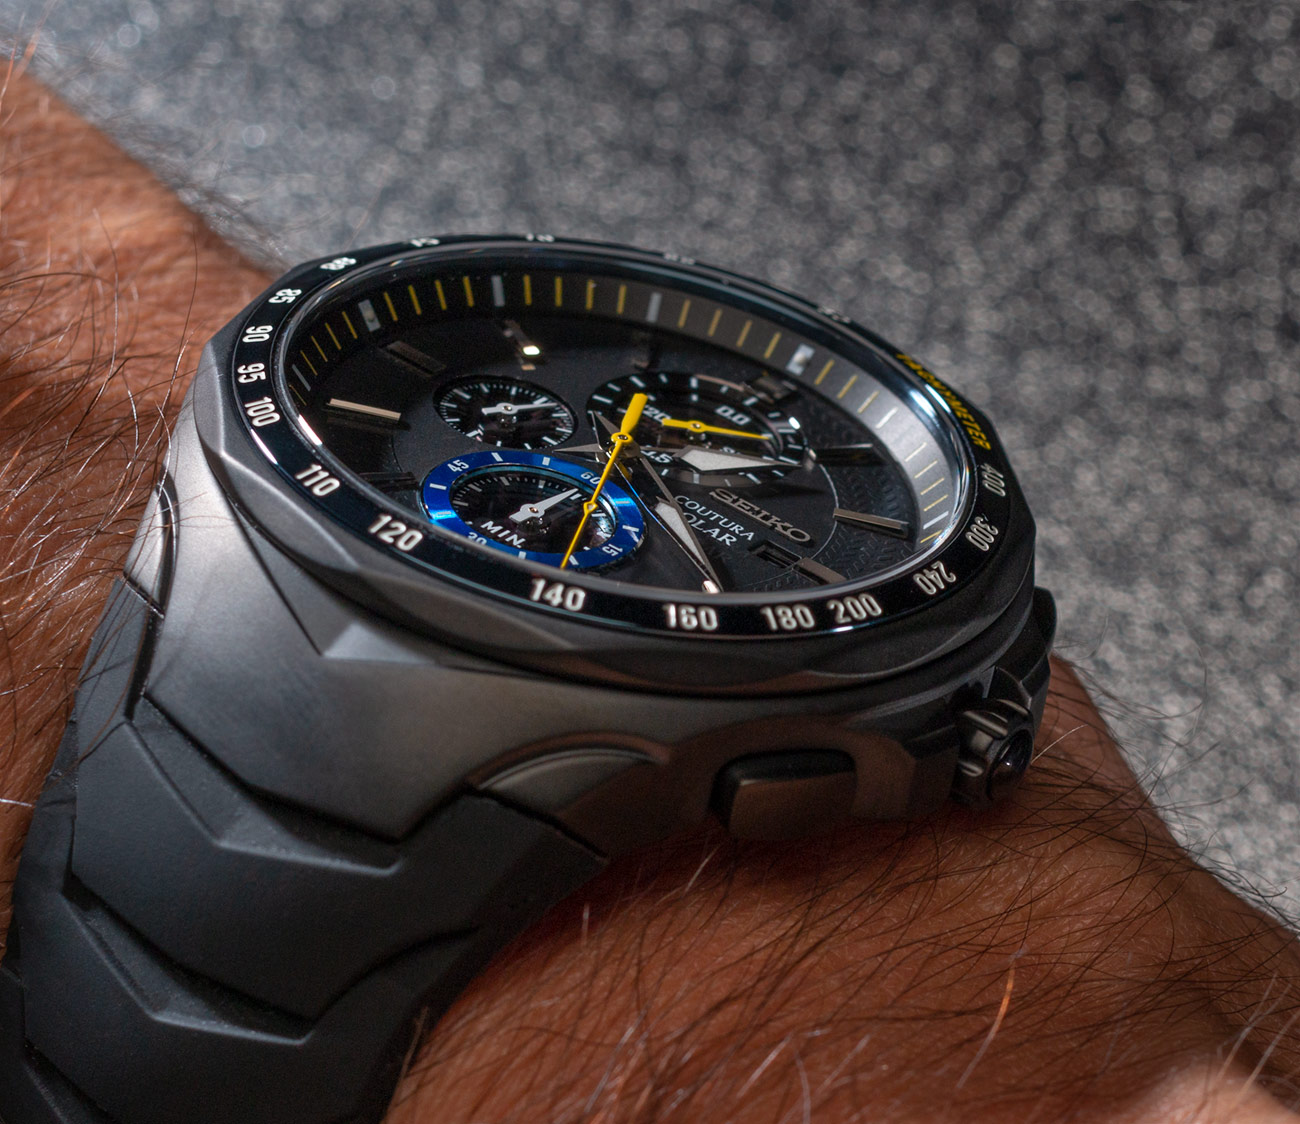 Seiko Coutura Solar Chronograph Jimmie Johnson Special Edition Watch  Hands-On | aBlogtoWatch